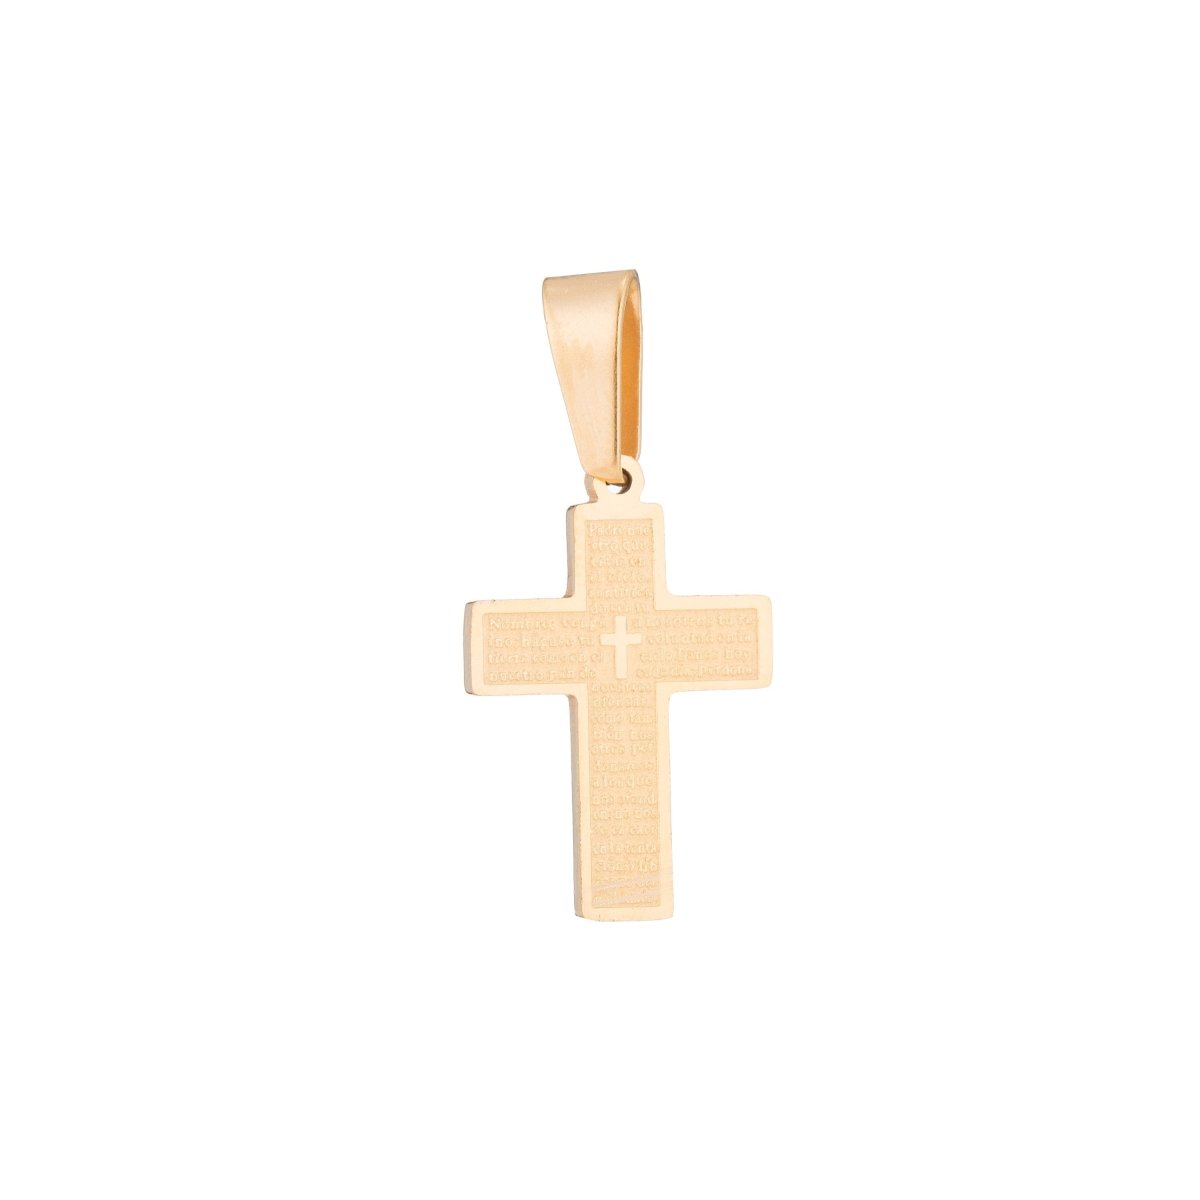 DEL- Gold Cross, Latin, Prayer, Amen, Jesus, Love, Family, Church, Peace, Craft Necklace Pendant Charm Bead Bails Findings for Jewelry Making, PDSS-128/J-439 - DLUXCA